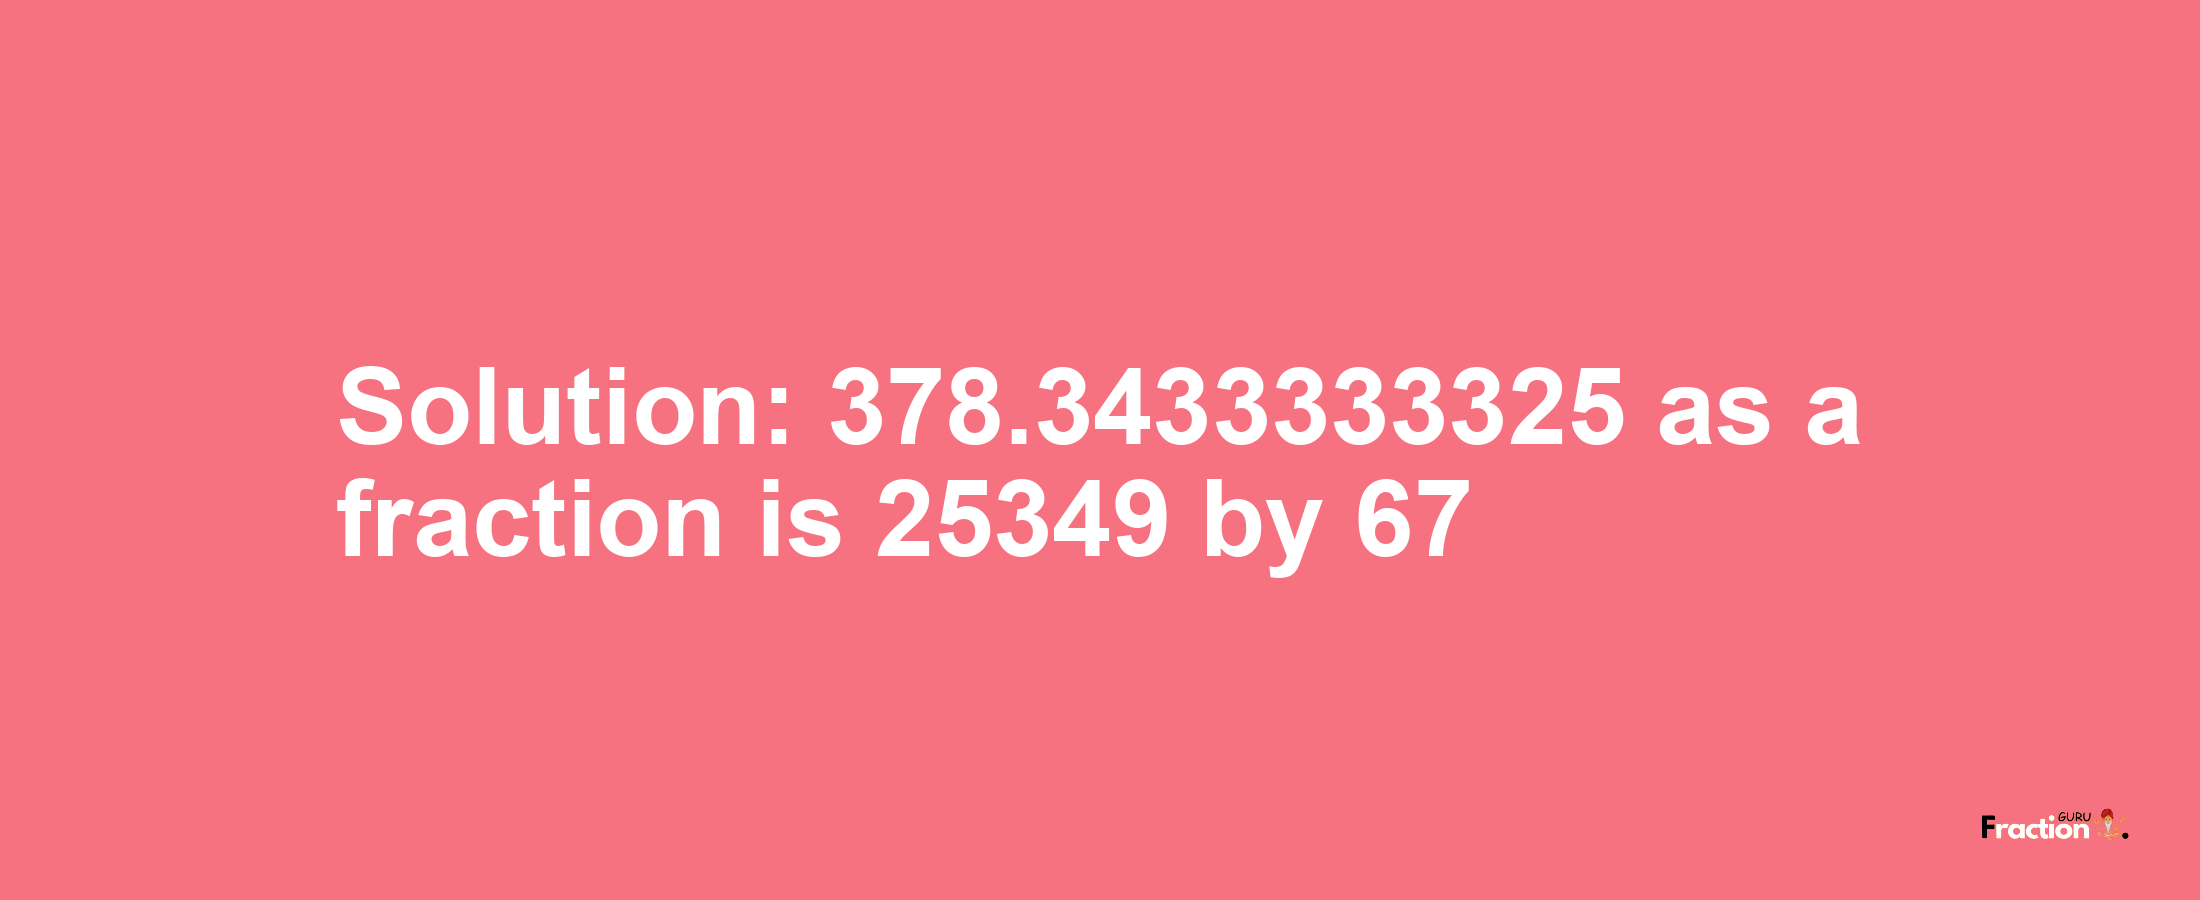 Solution:378.3433333325 as a fraction is 25349/67